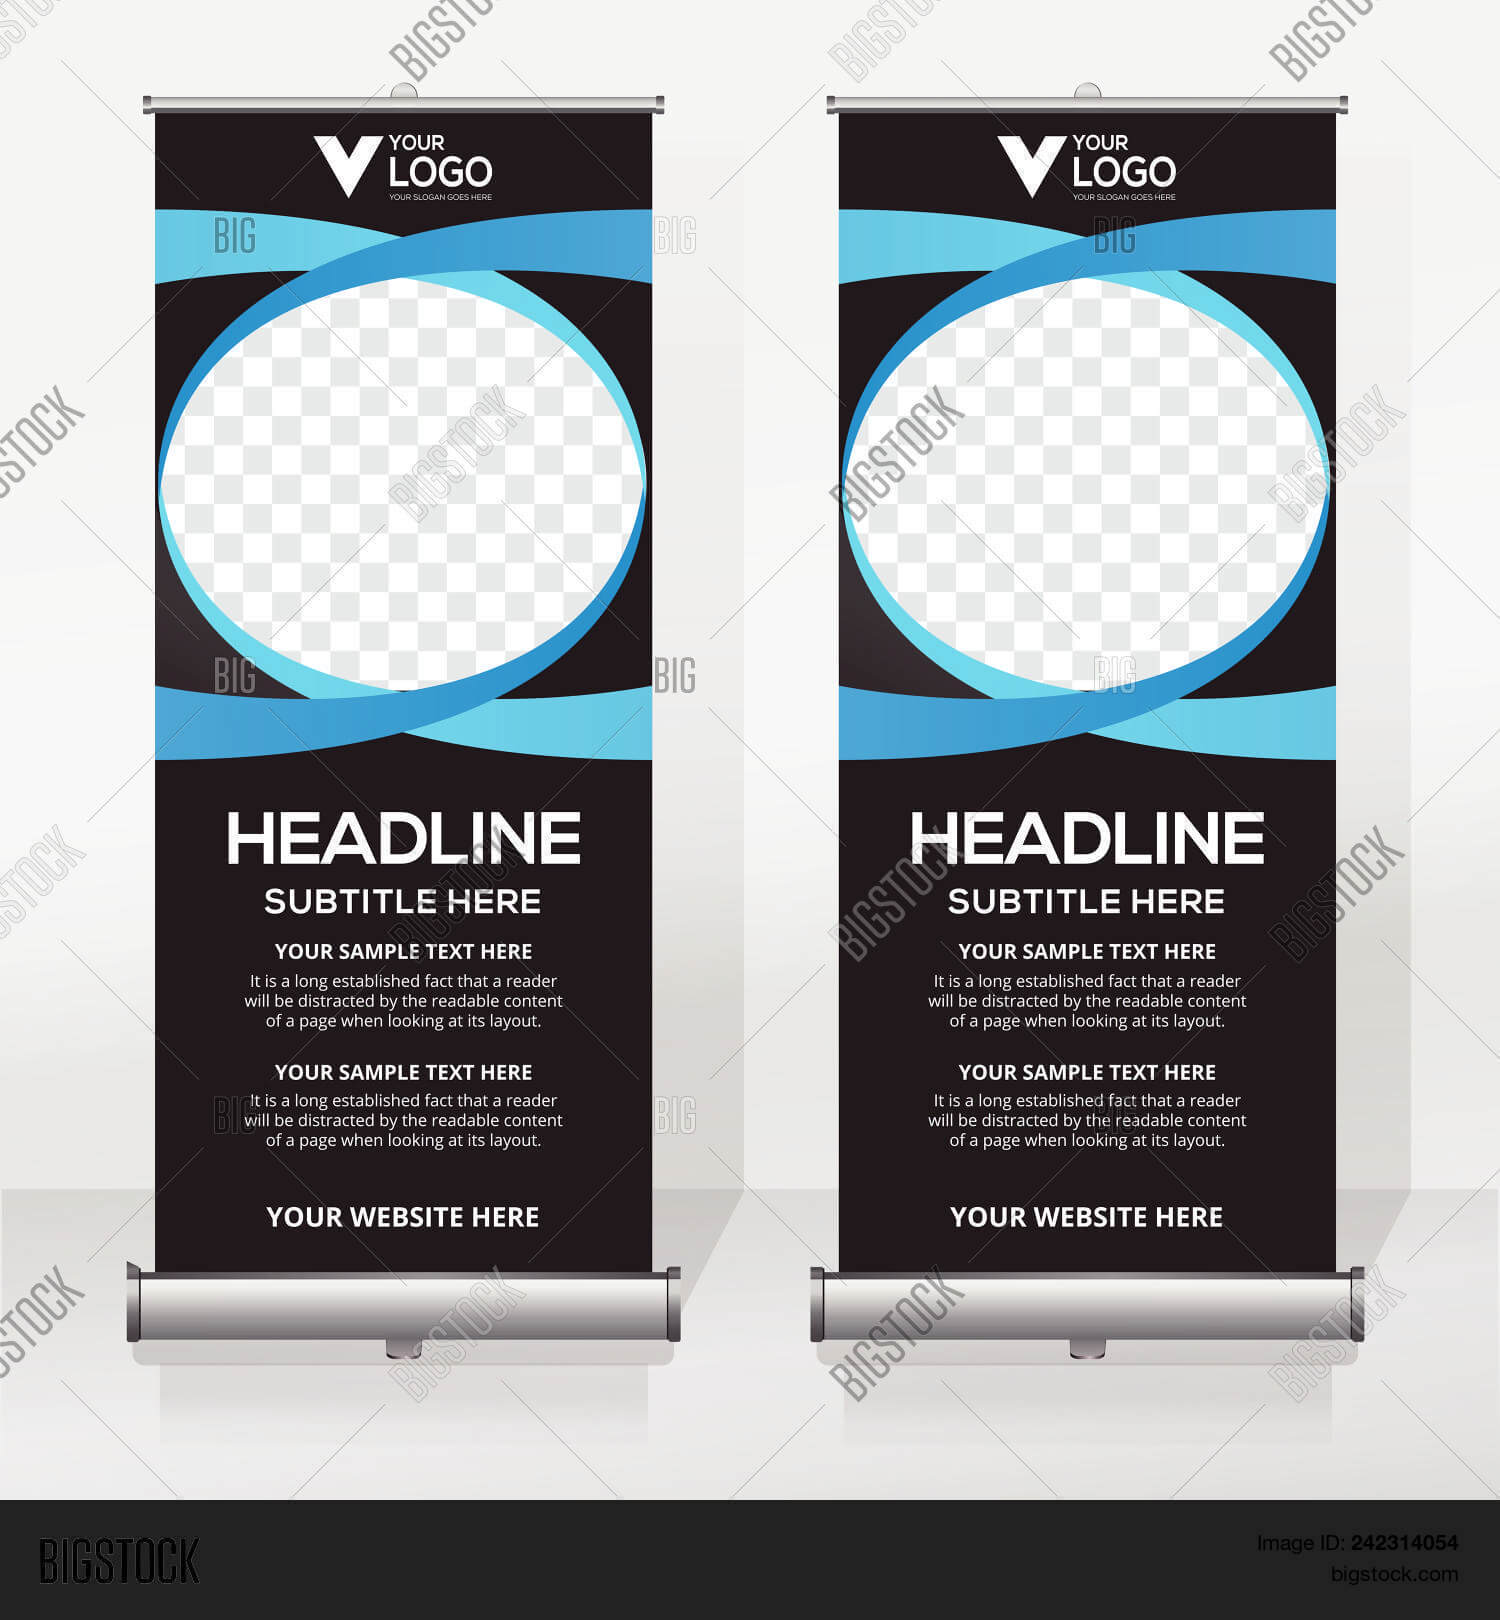 Roll Banner Design Vector & Photo (Free Trial) | Bigstock Throughout Retractable Banner Design Templates